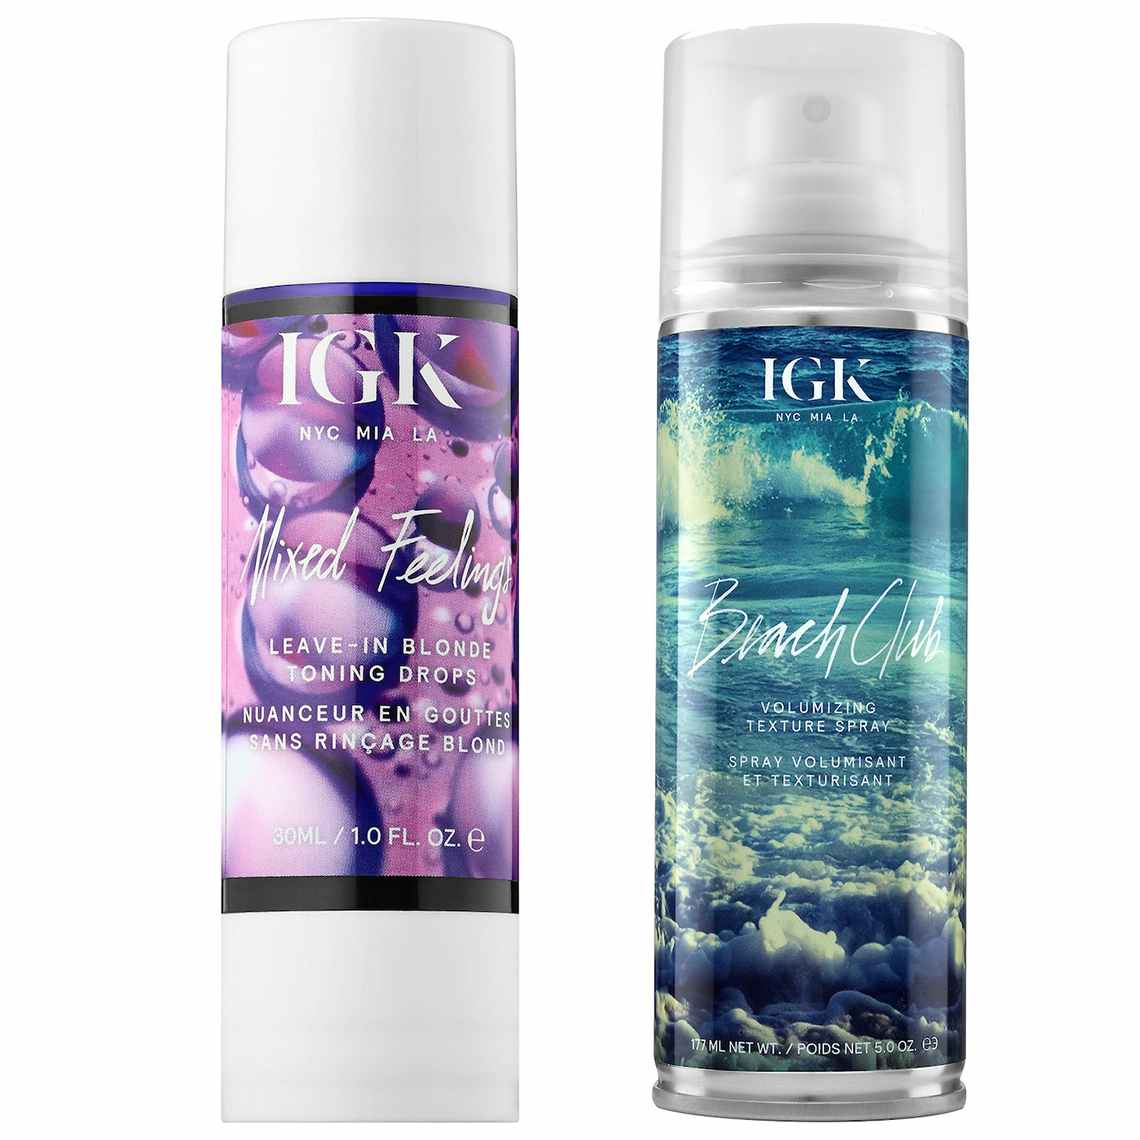 Two bottles of IGK hair care products.